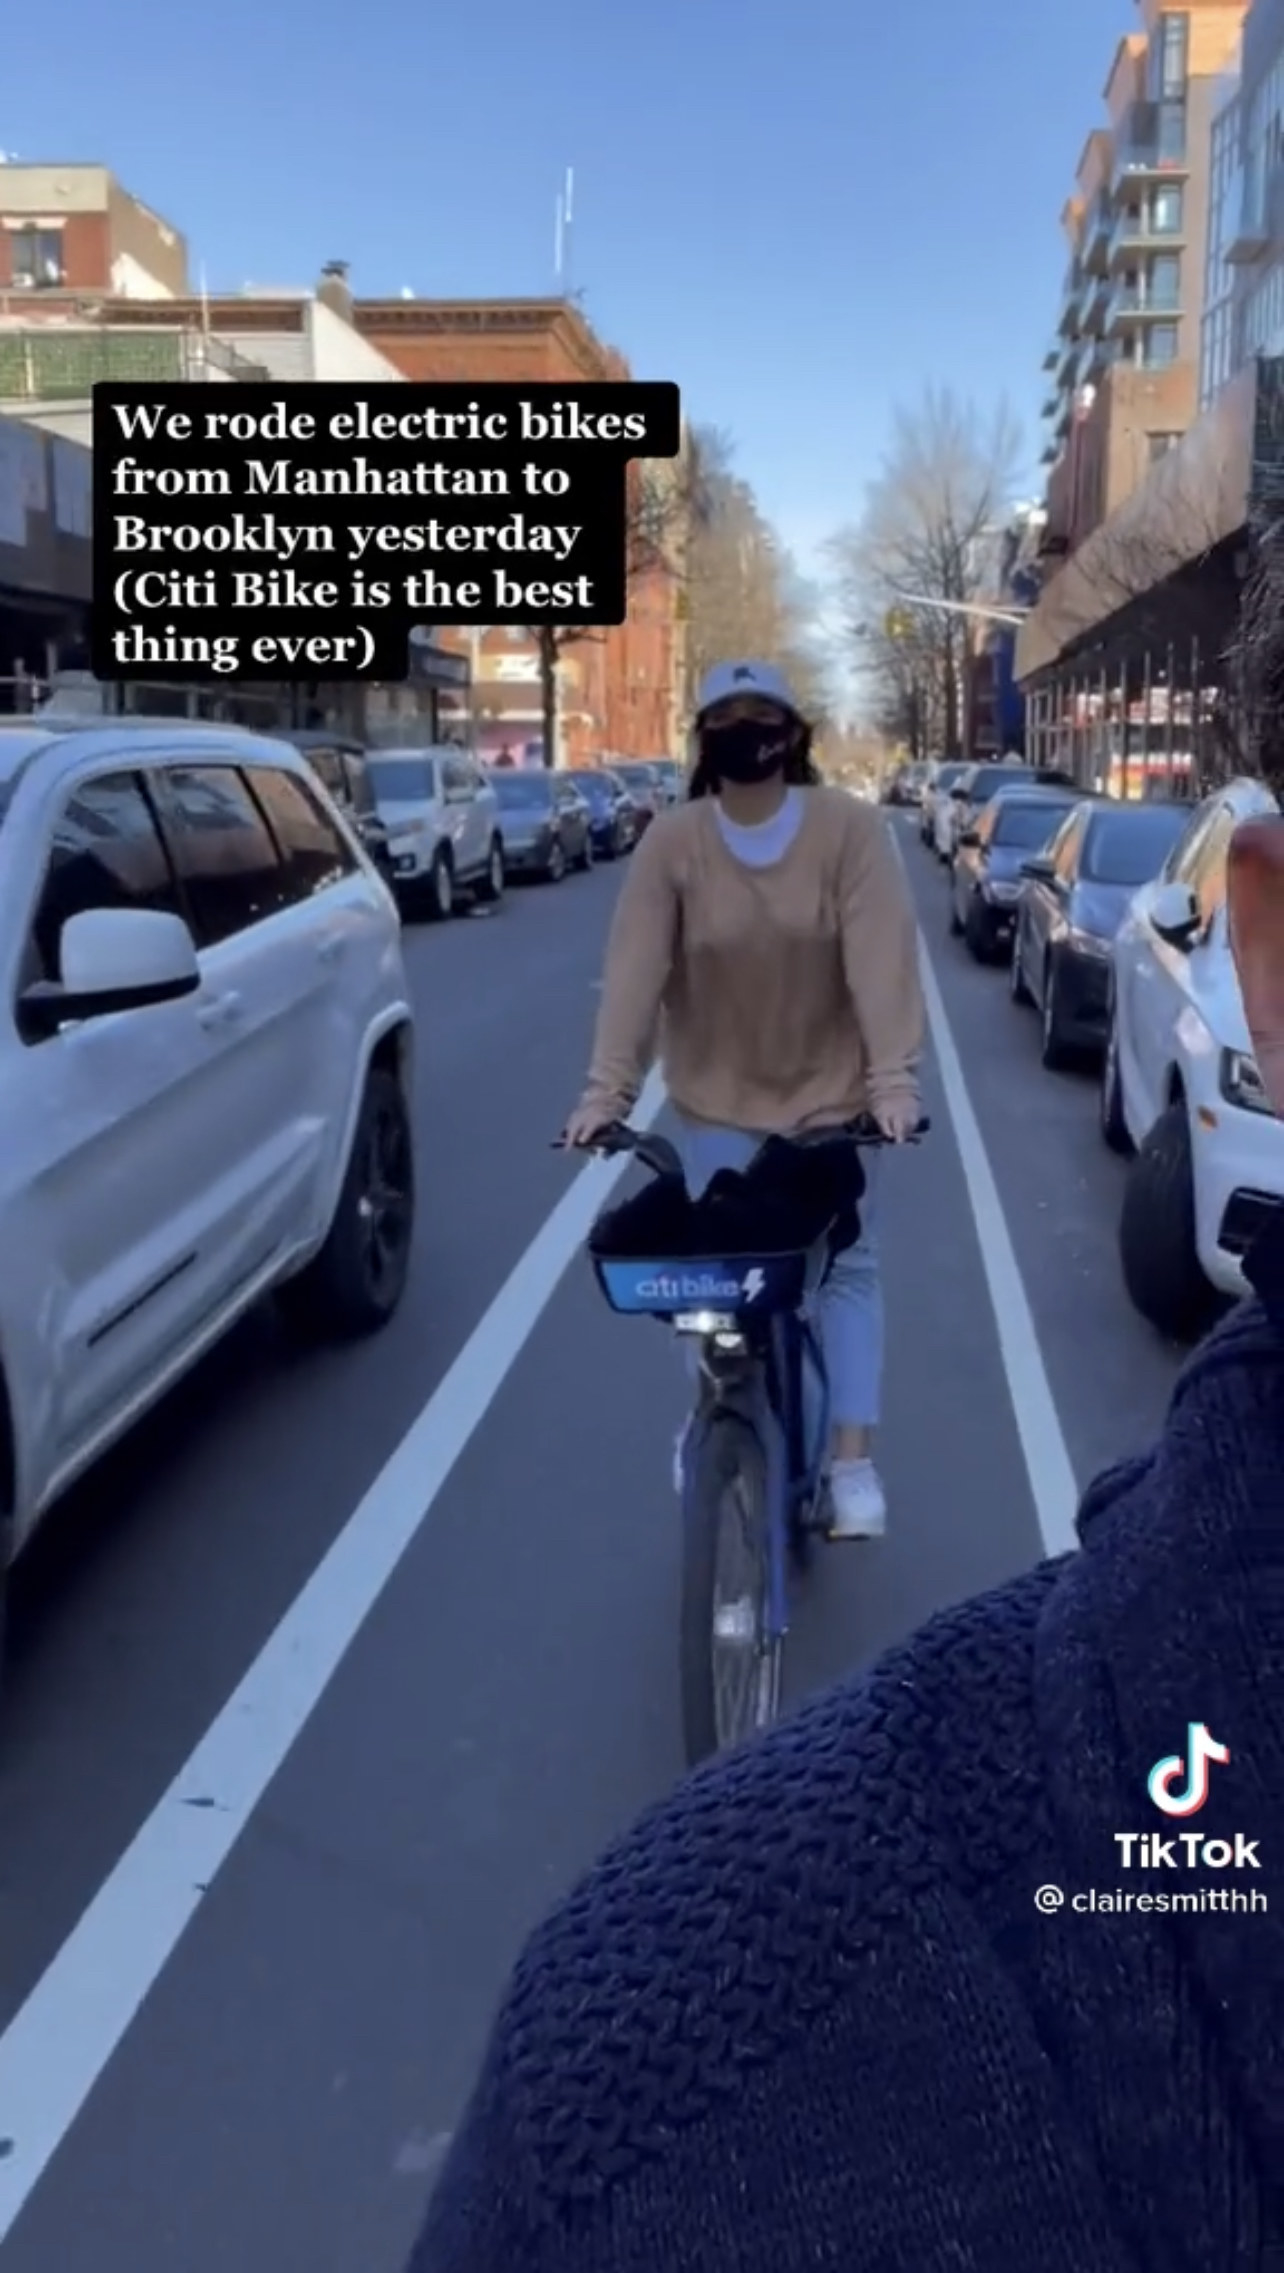 Woman riding Citi Bike with text saying they rode electric bikes from Manhattan to Brooklyn